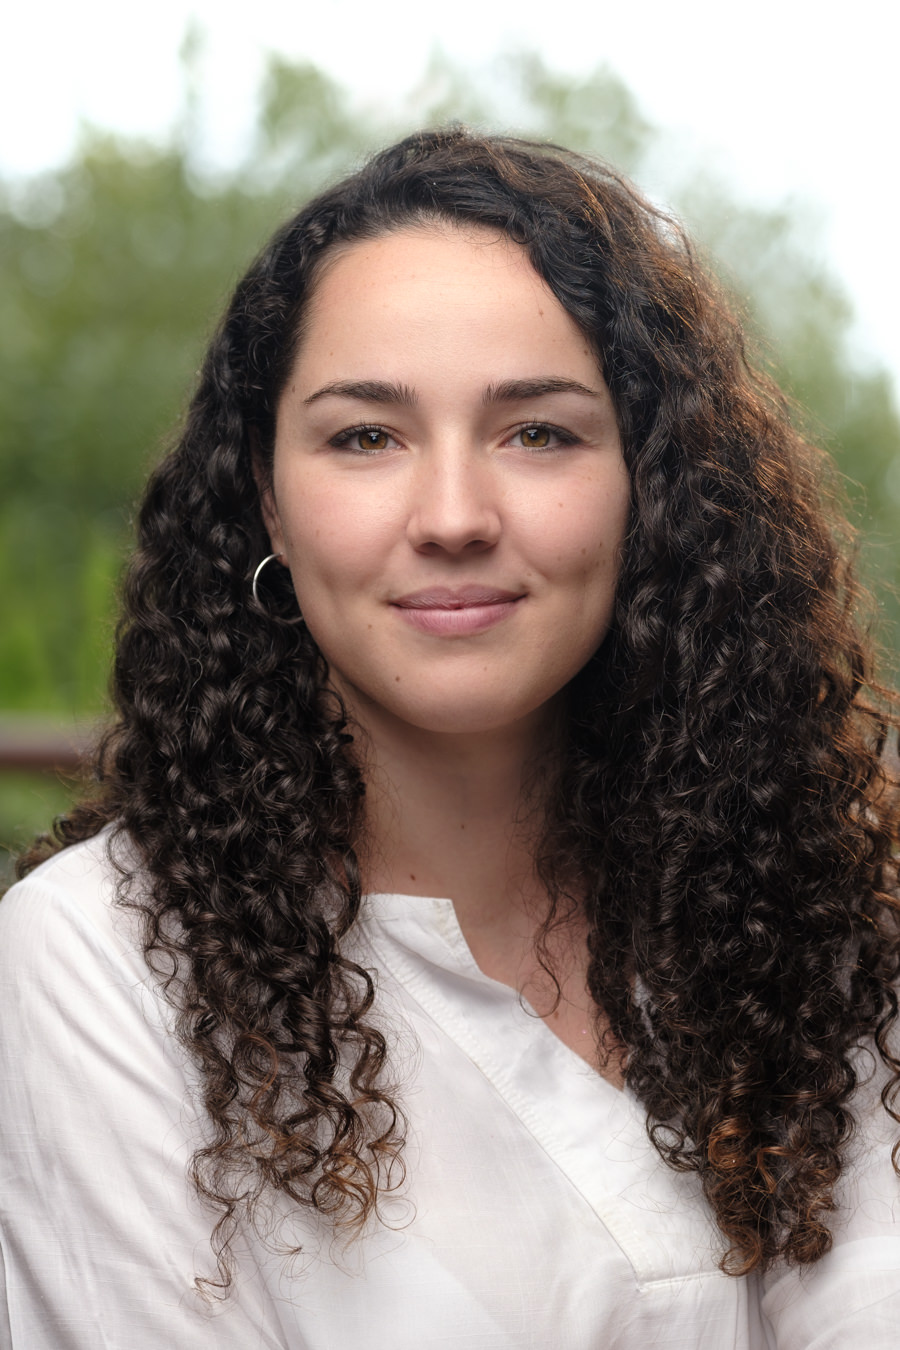 A corporate headshot of a young Spanish woman with curly brown hair and light brown eyes. She's wearing a white shirt and smiling naturally. The background of the photo is blurred and of trees. The lady works for Lemonade Software Development in Barcelona.